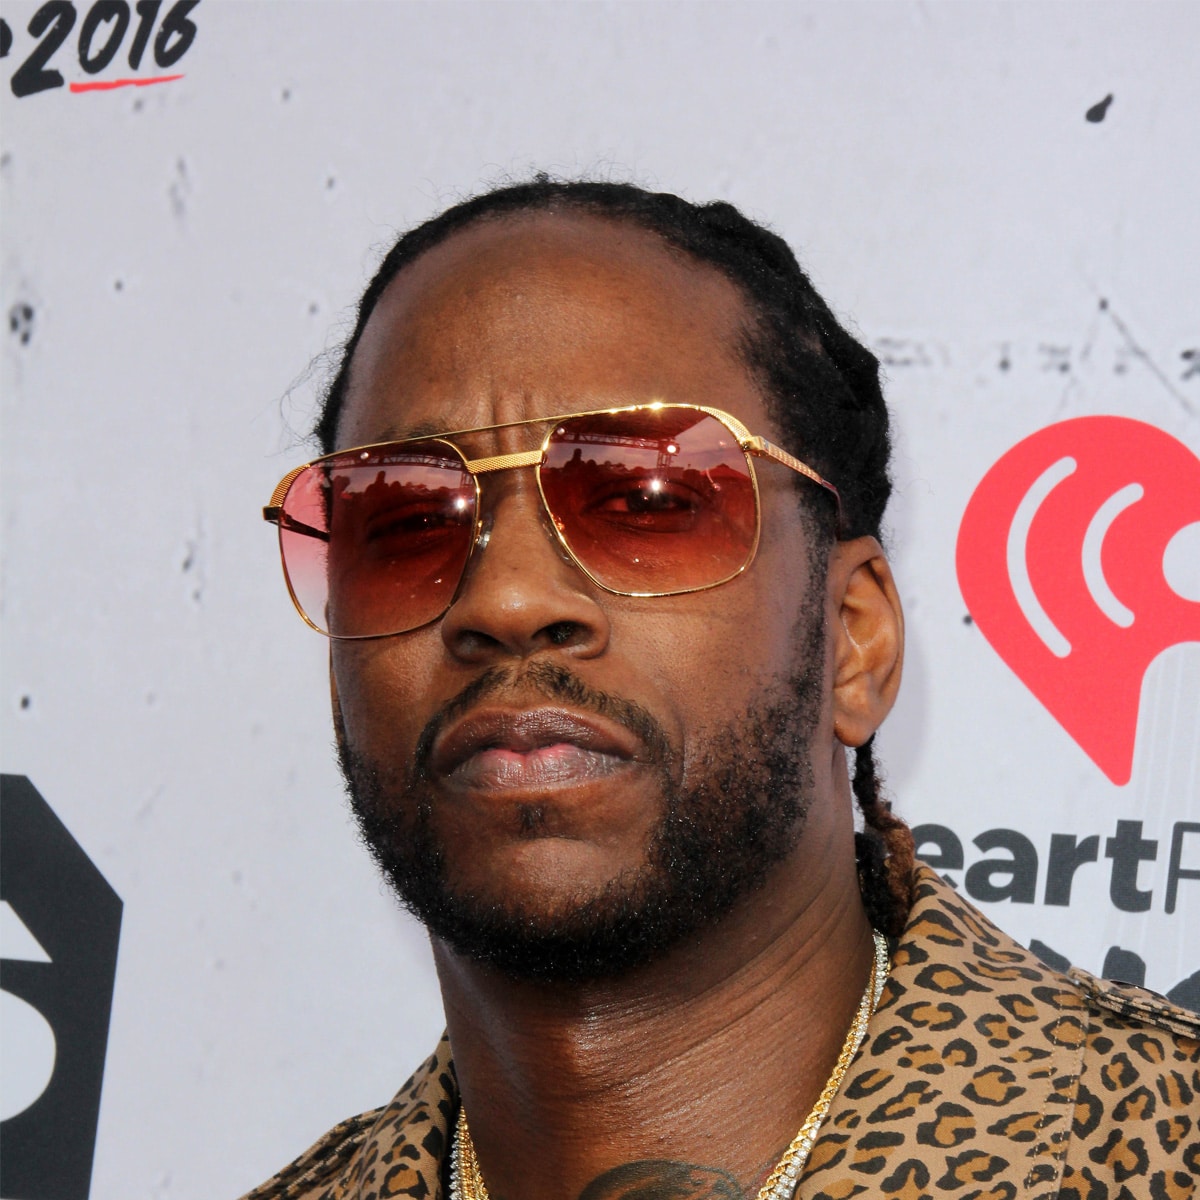 rapper 2 chainz attends the iheart radio music awards in 2016